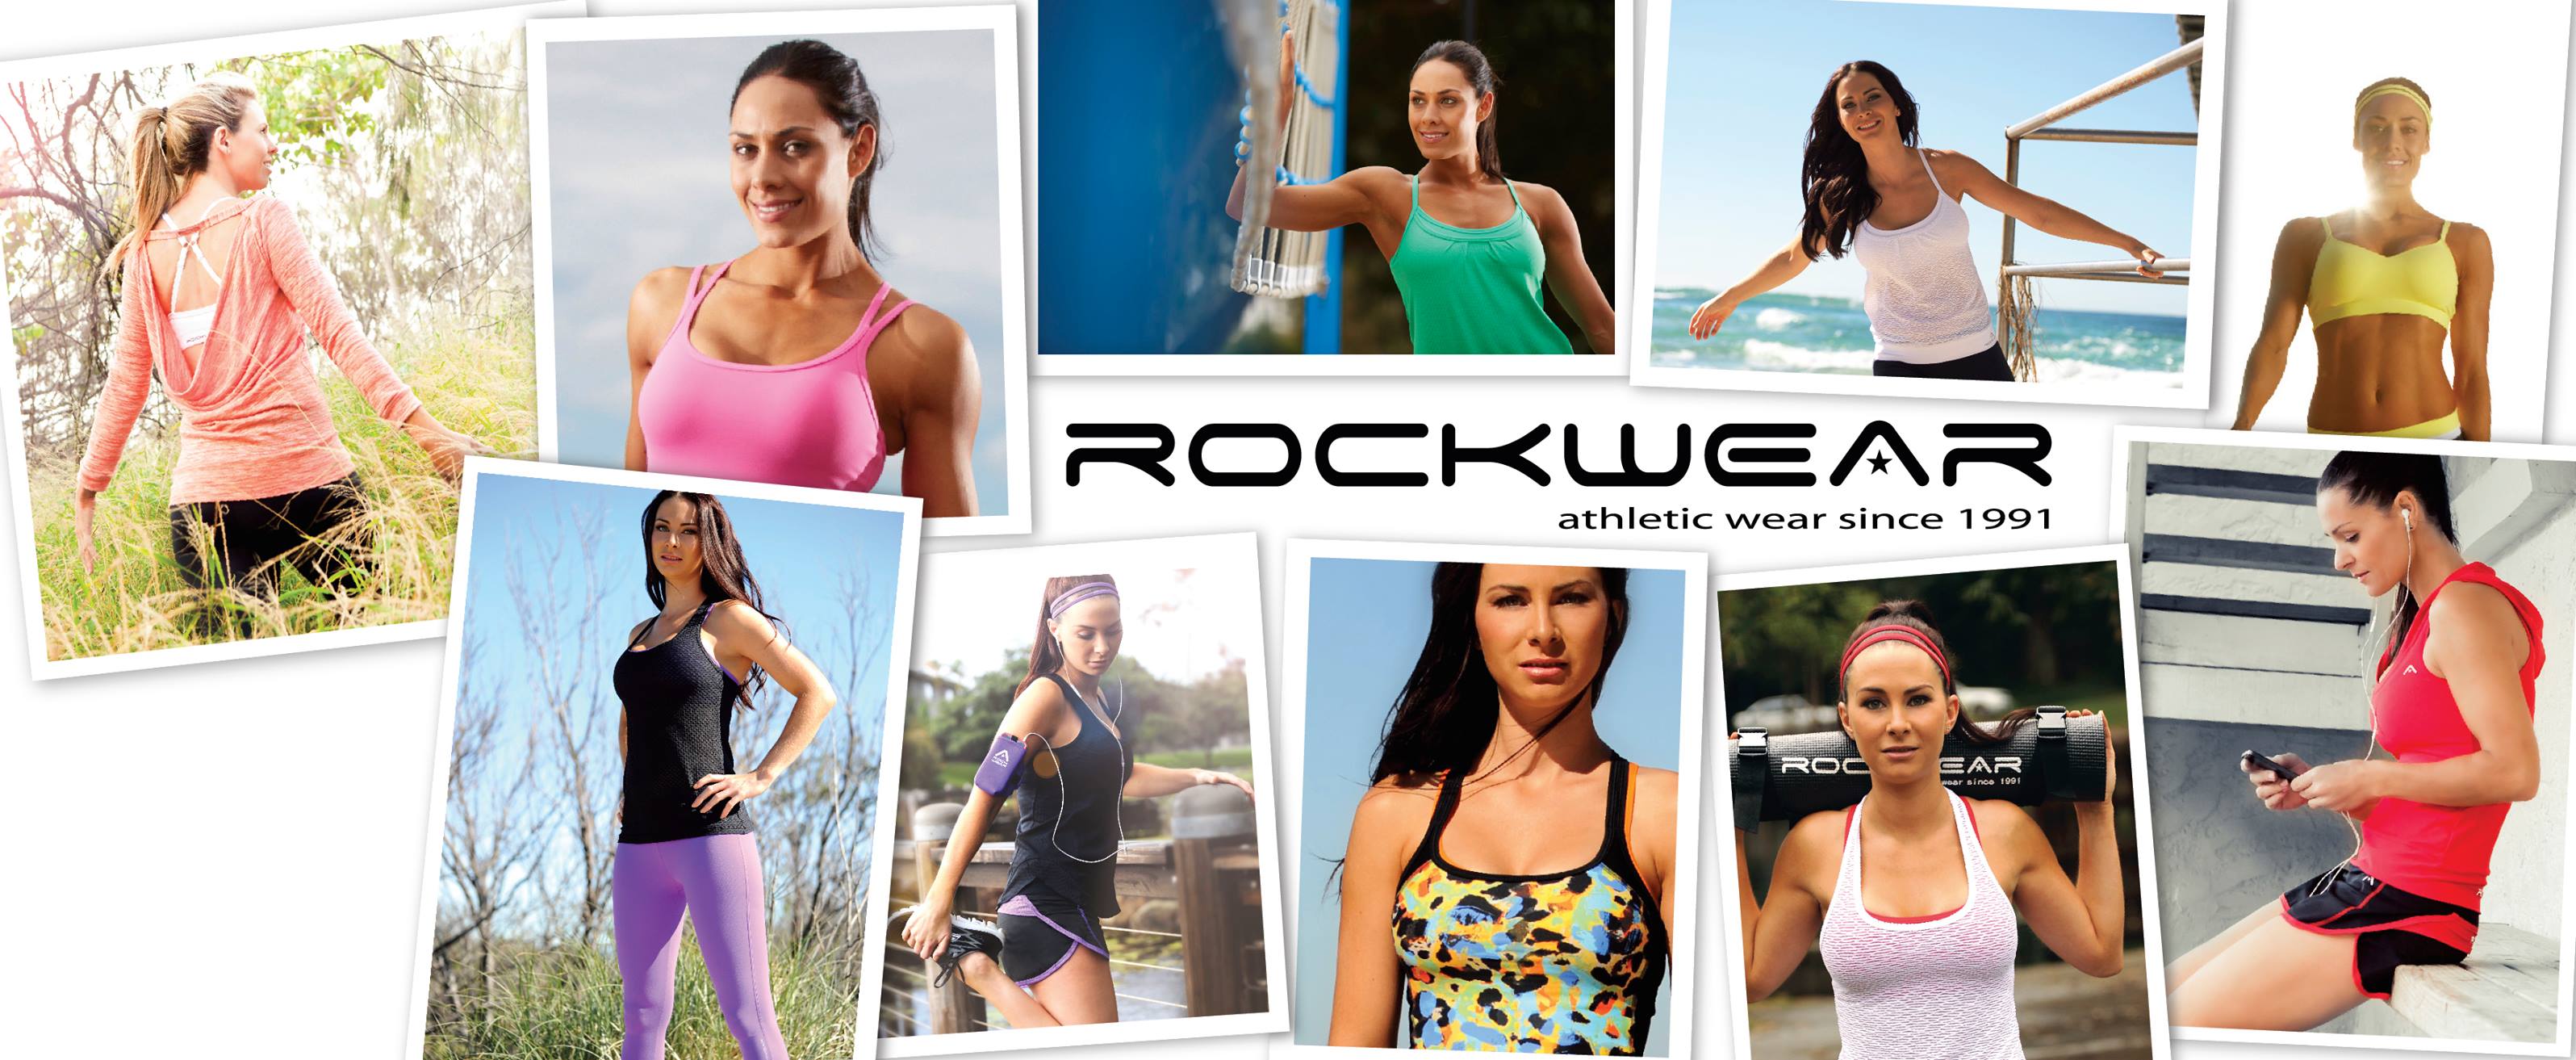 Rockwear extra 20% OFF on selected sale styles including shorts, singlets, jackets & more